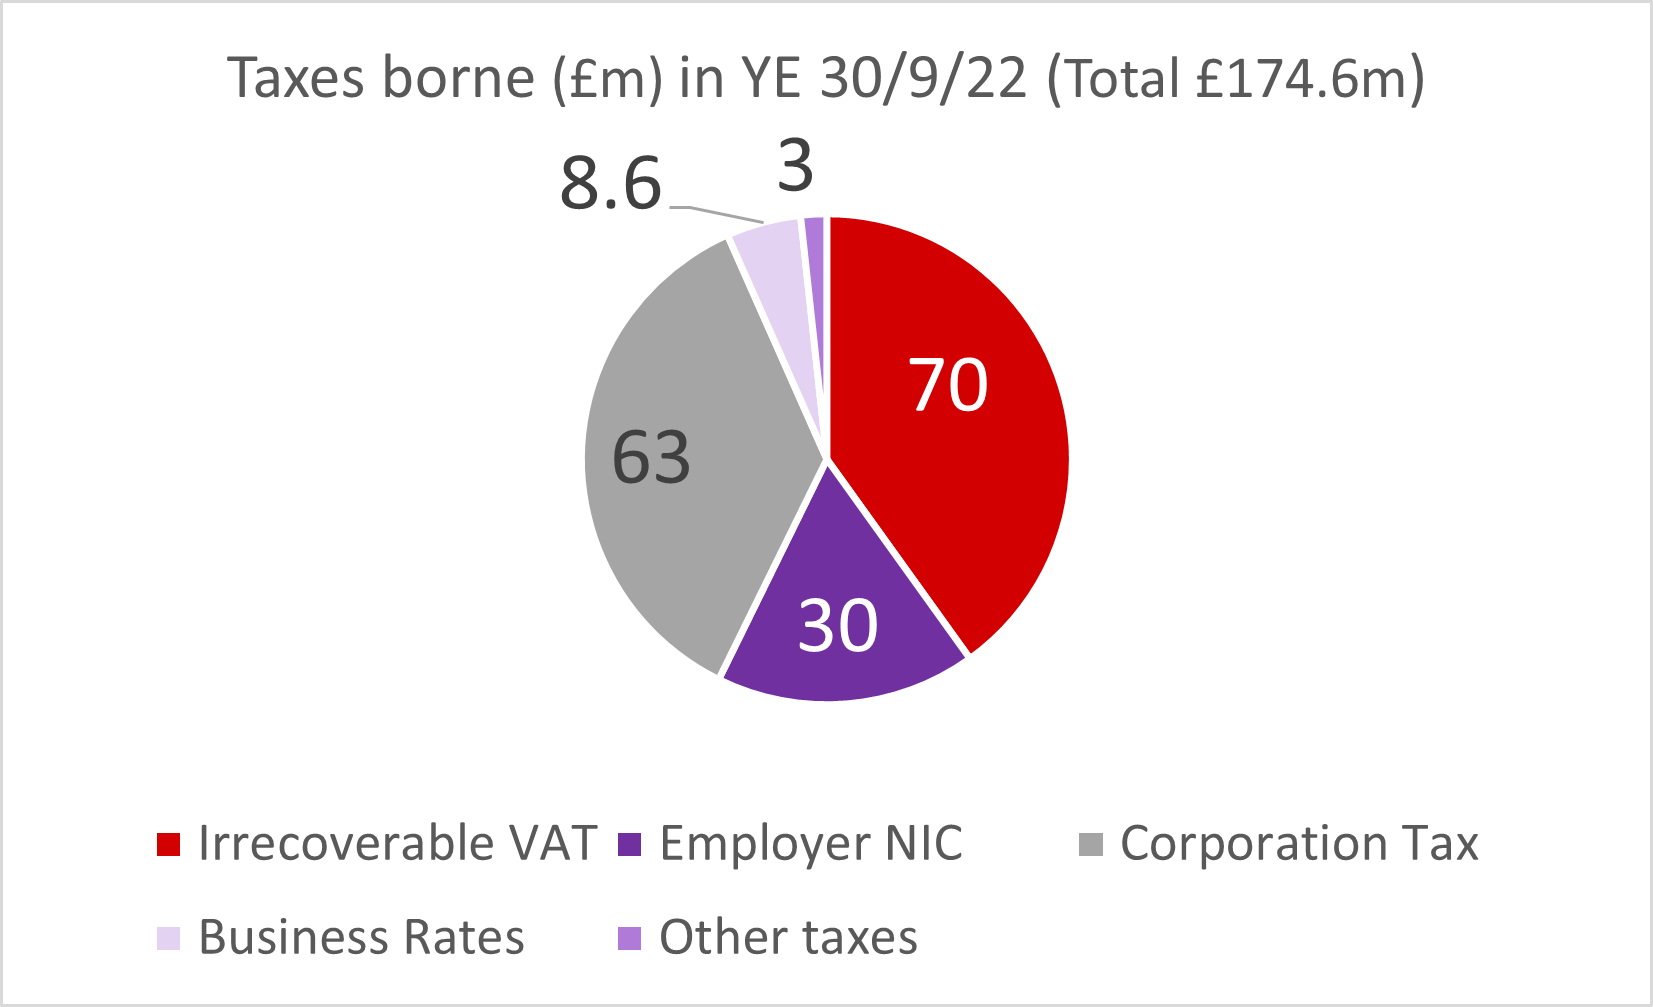 A pie chart that shows taxes borne in pounds in year end 2022 with a total of 174.6 million pounds. 70 percent is irrecoverable VAT, 63 is corporation tax, 30 is Employer NIC, 8.6 is business rates and 3 percent is other taxes